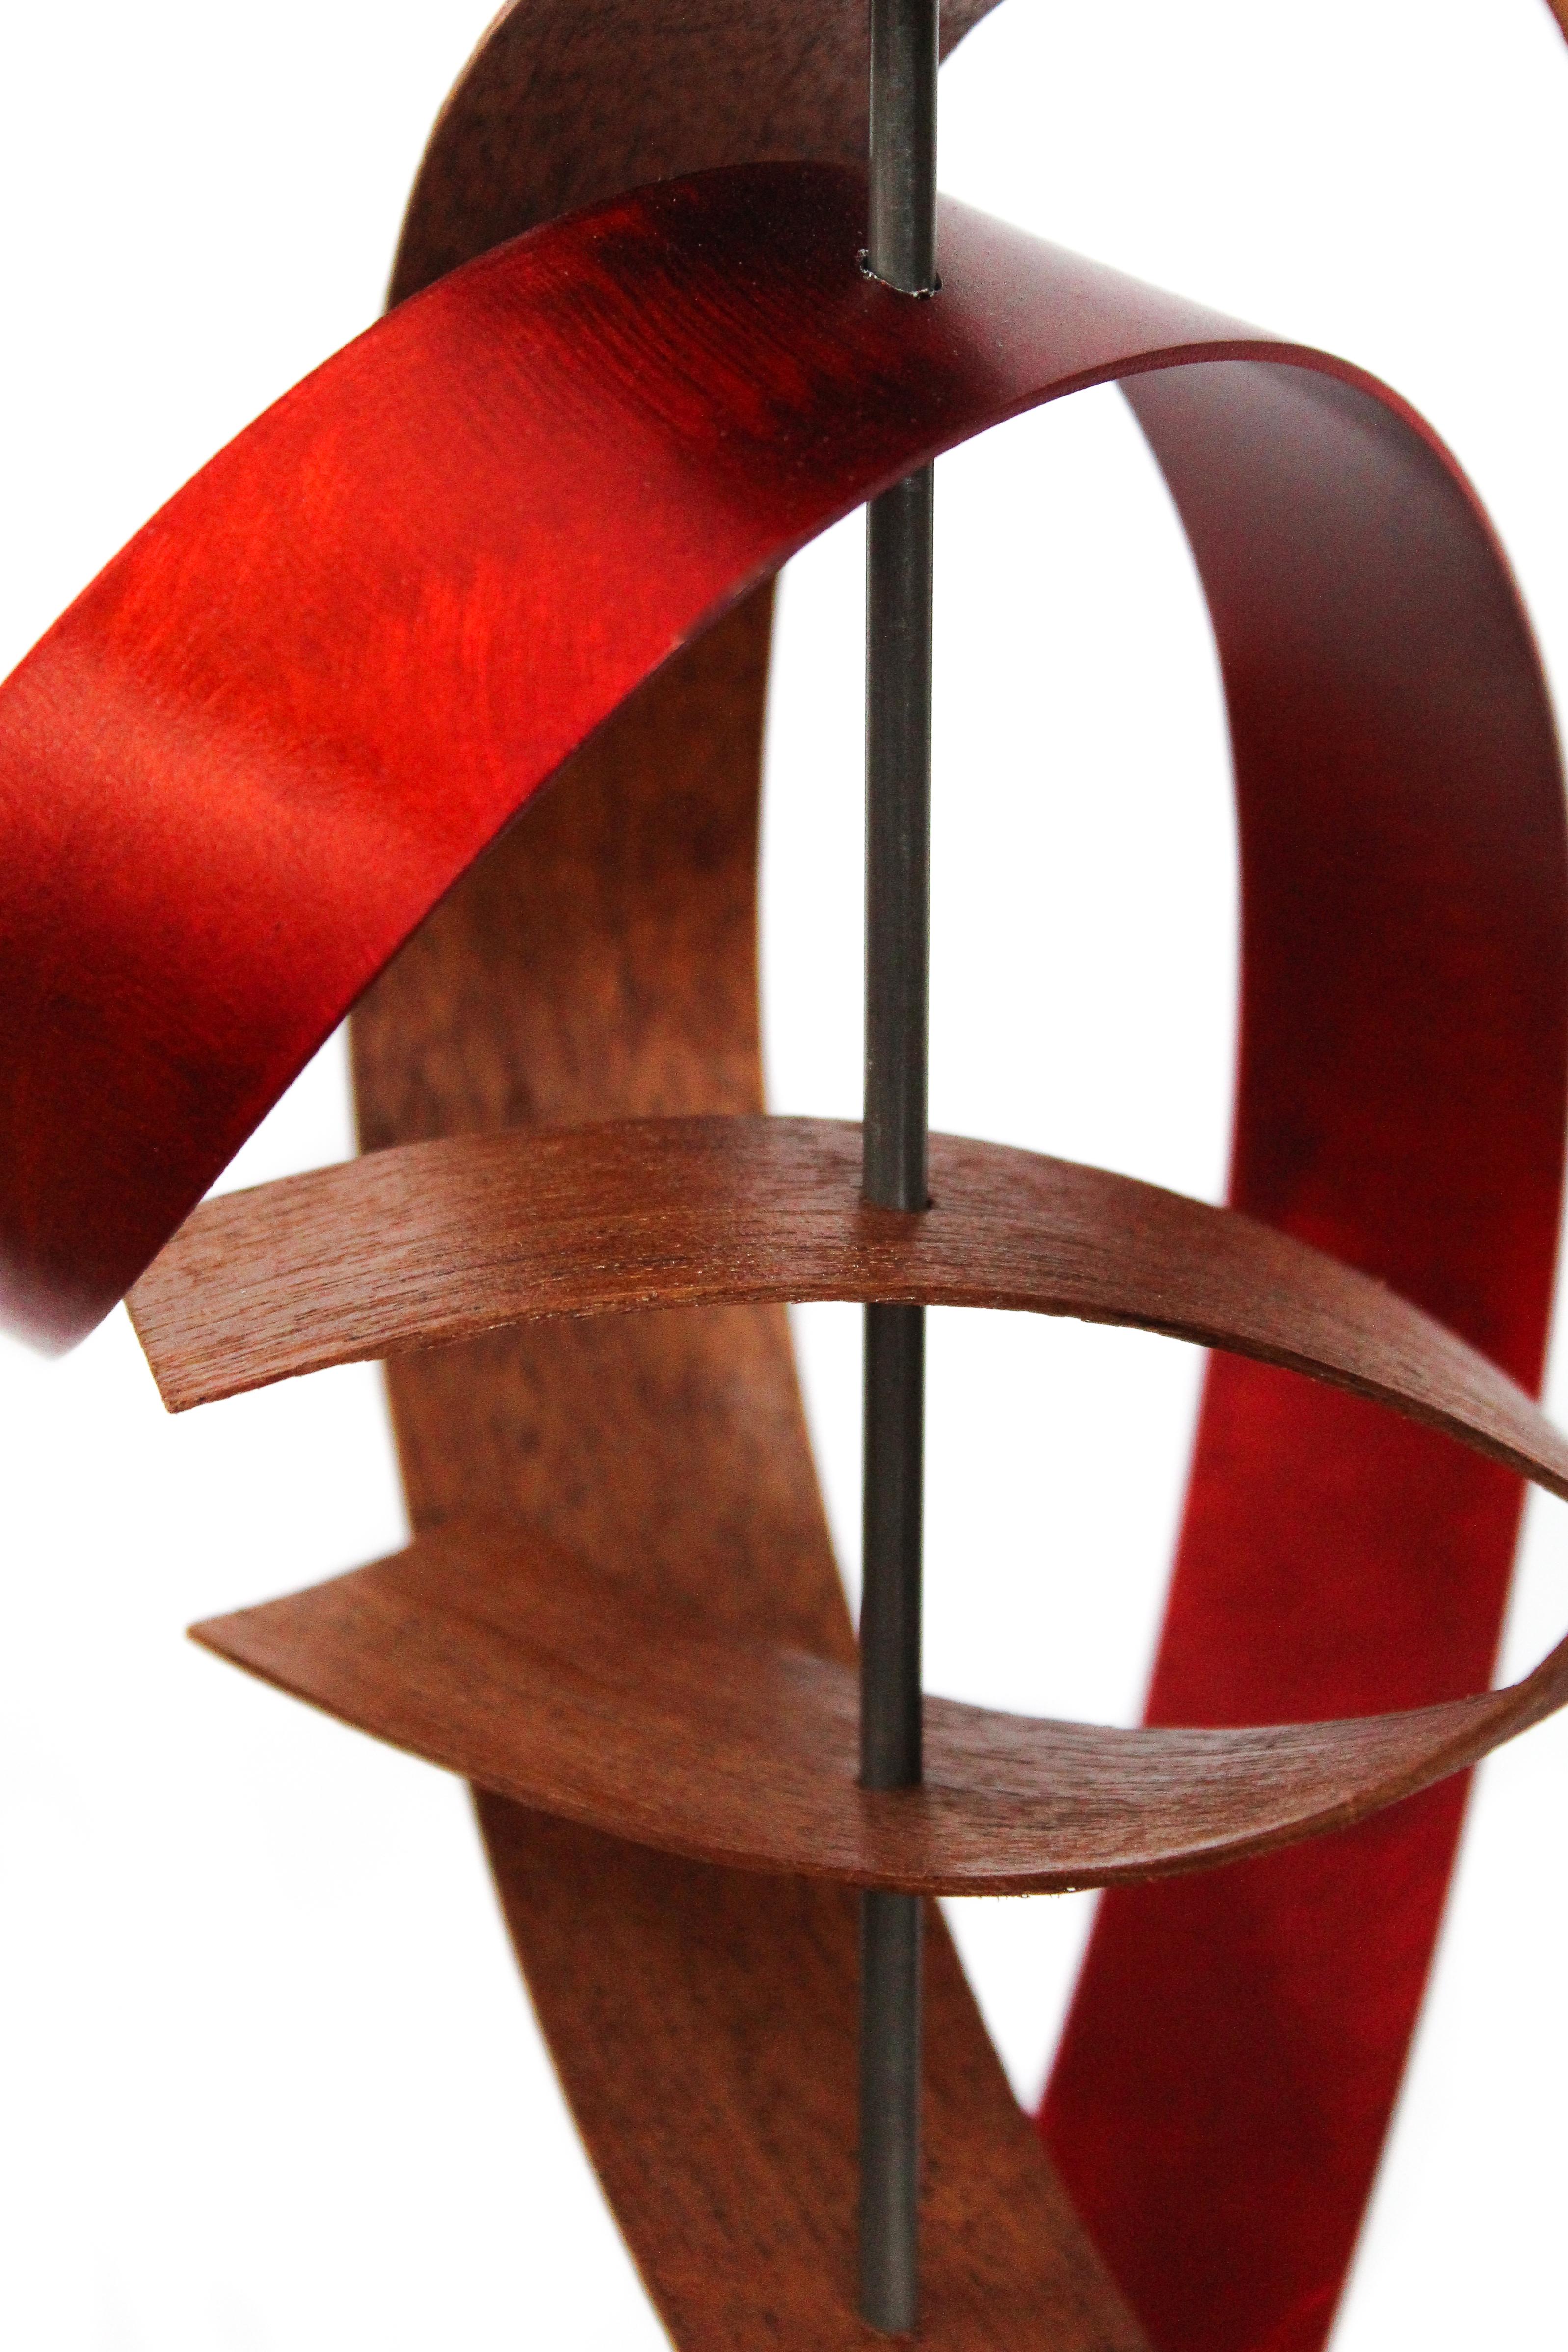 Contemporary Wood Metal Sculpture Art, Mid-Century Modern Inspired, by Jeff L. 4